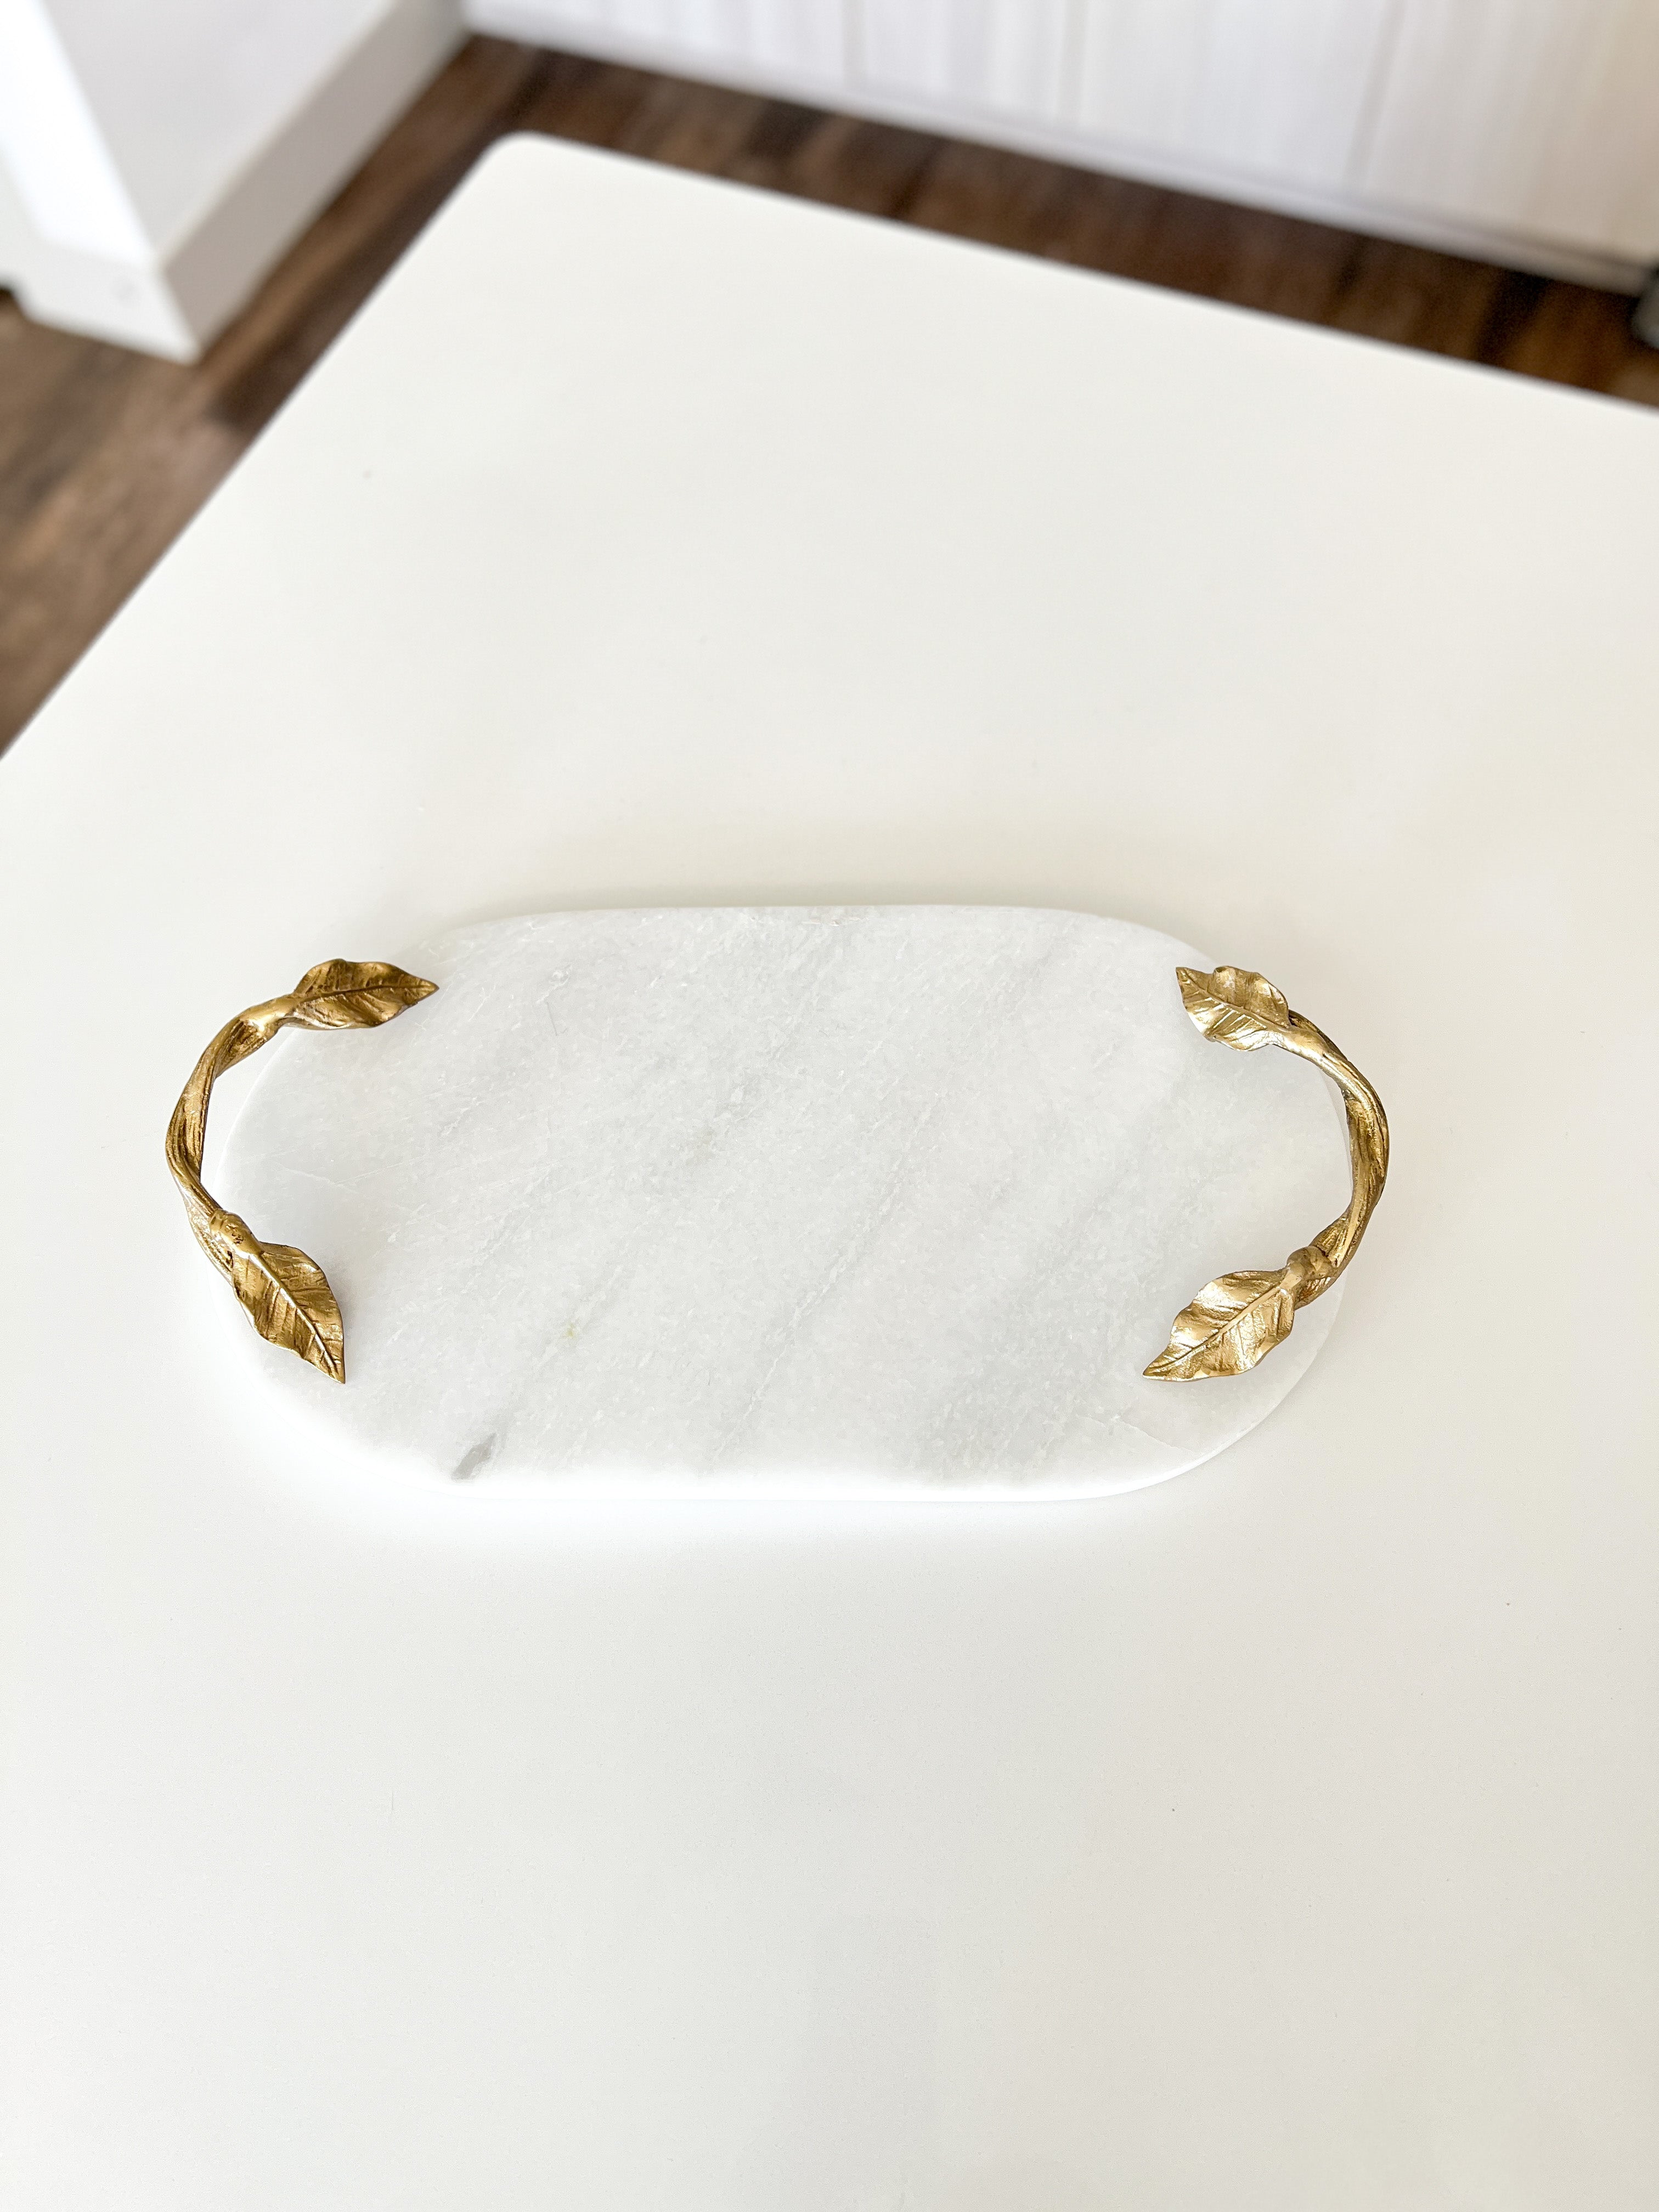 Marble Oval Tray with Gold Leaf Handles